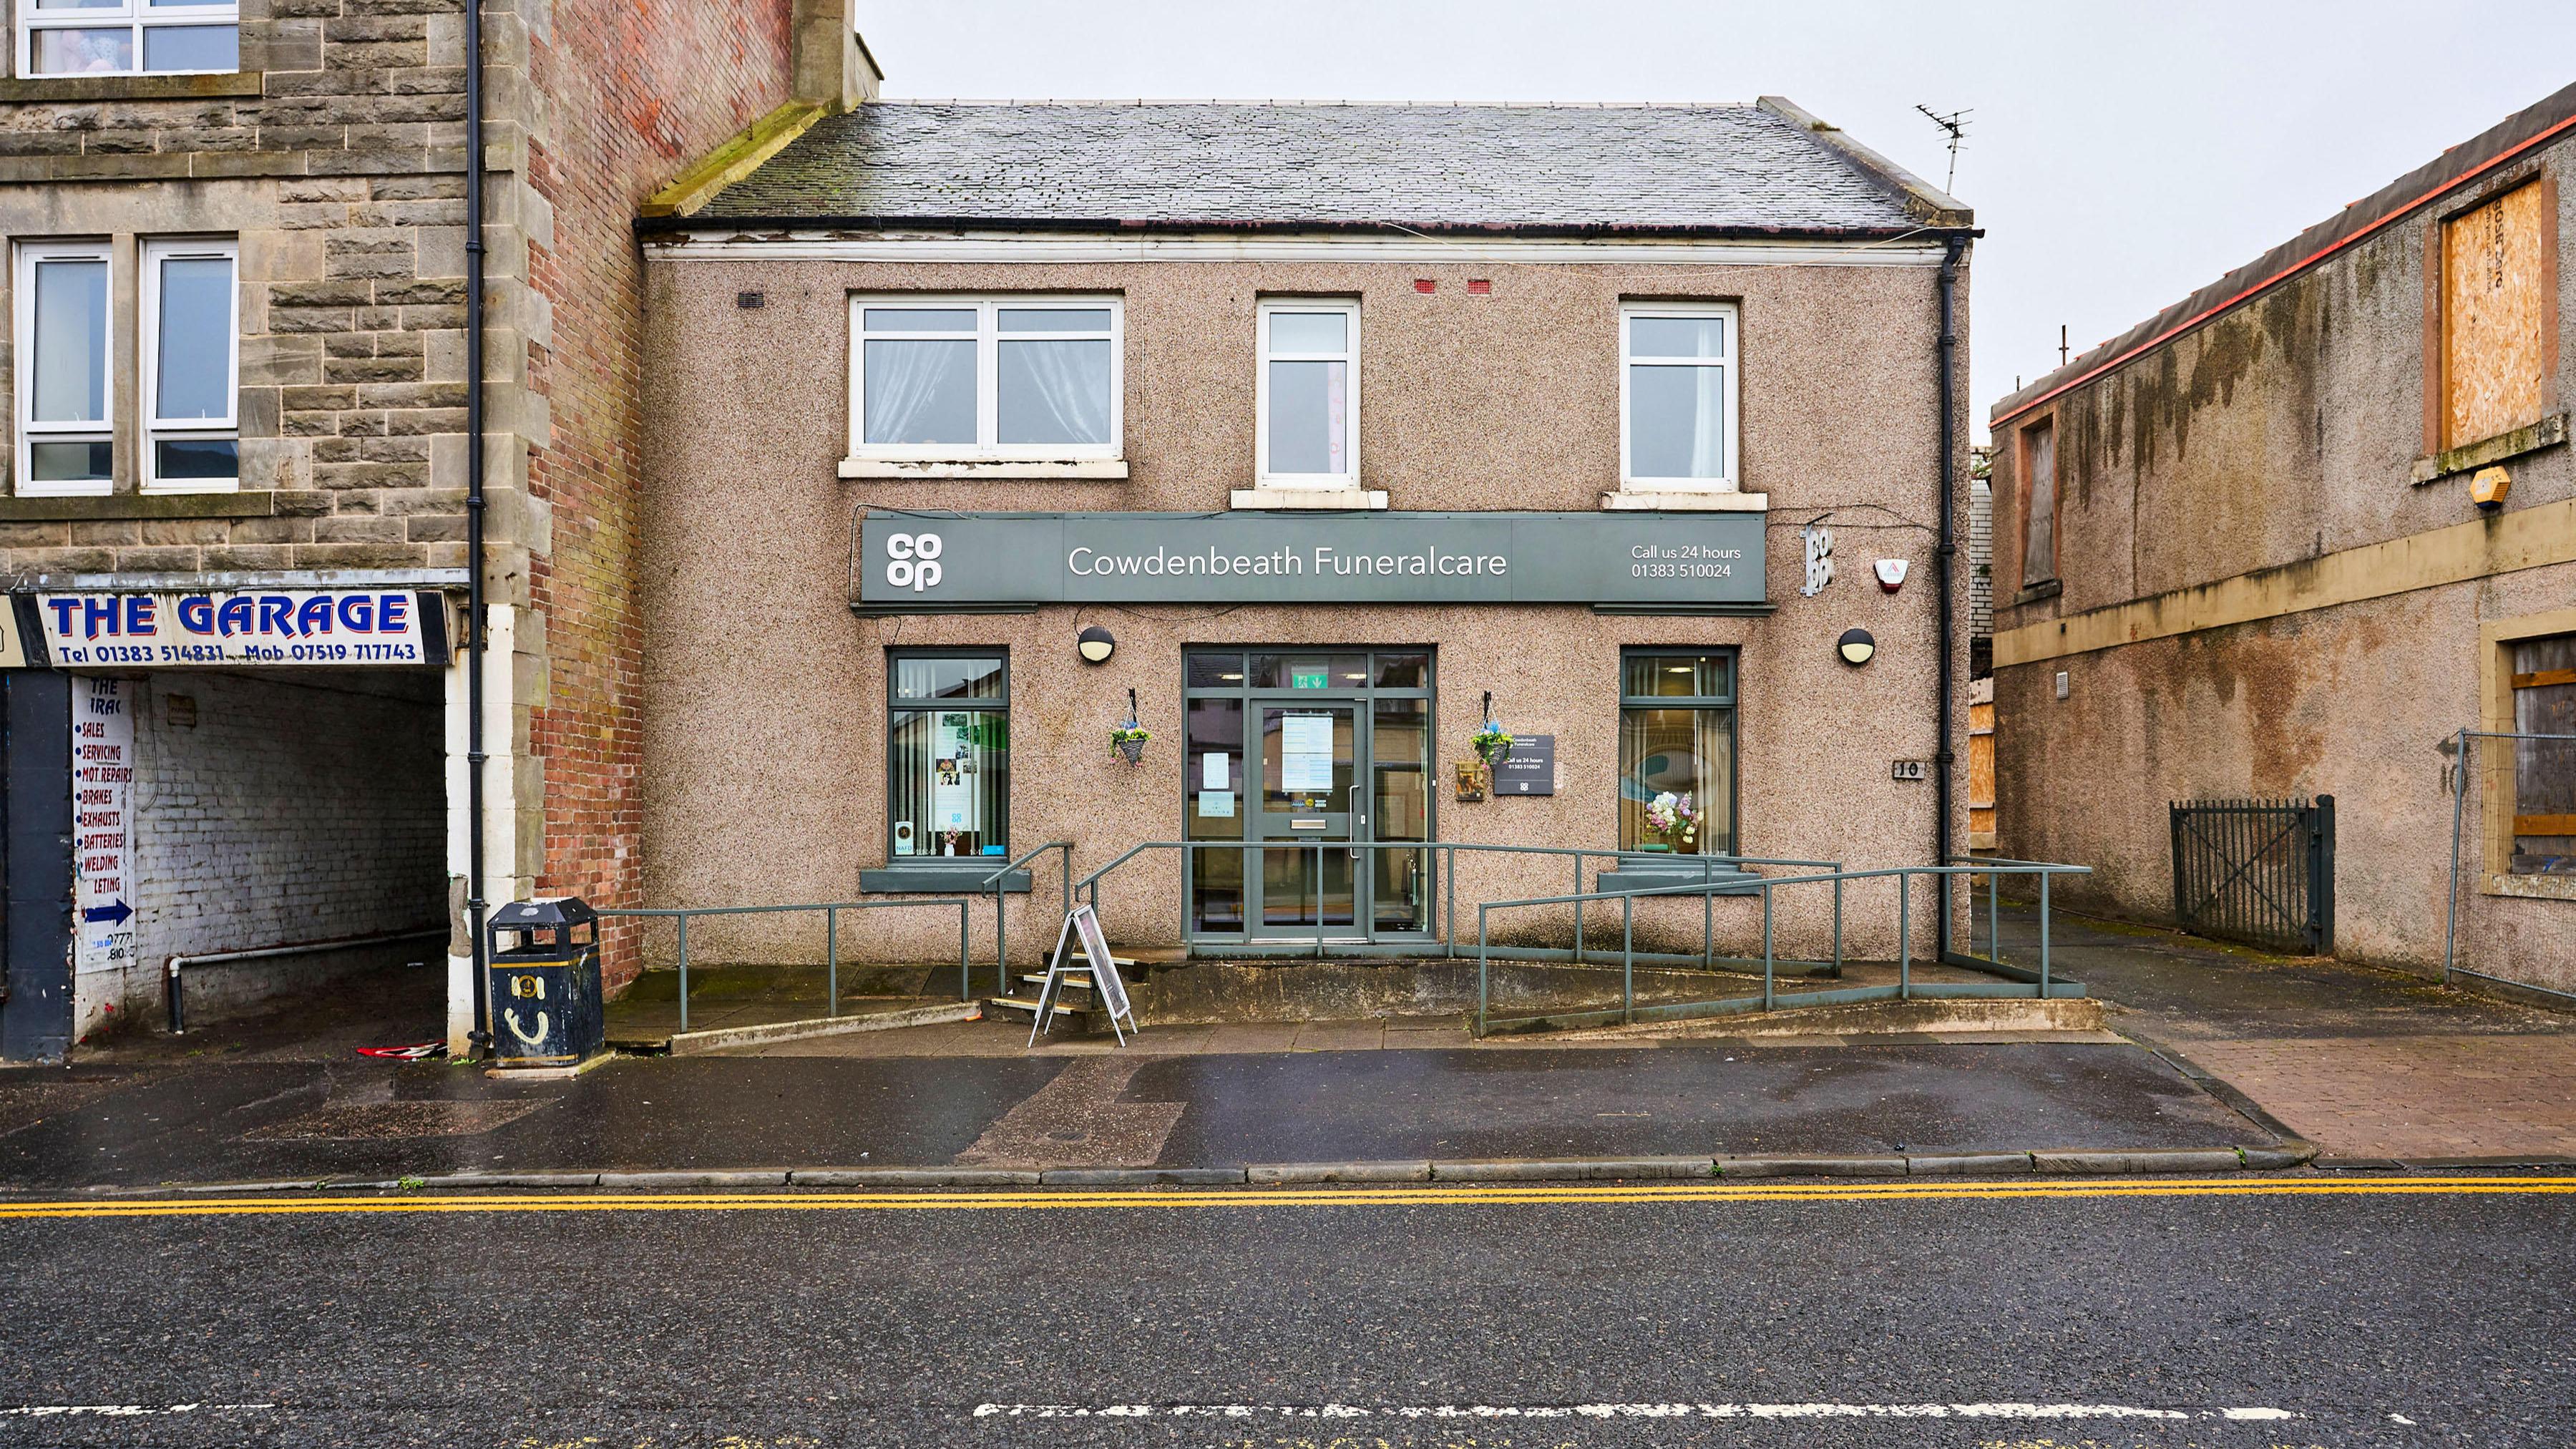 Images Cowdenbeath Funeralcare